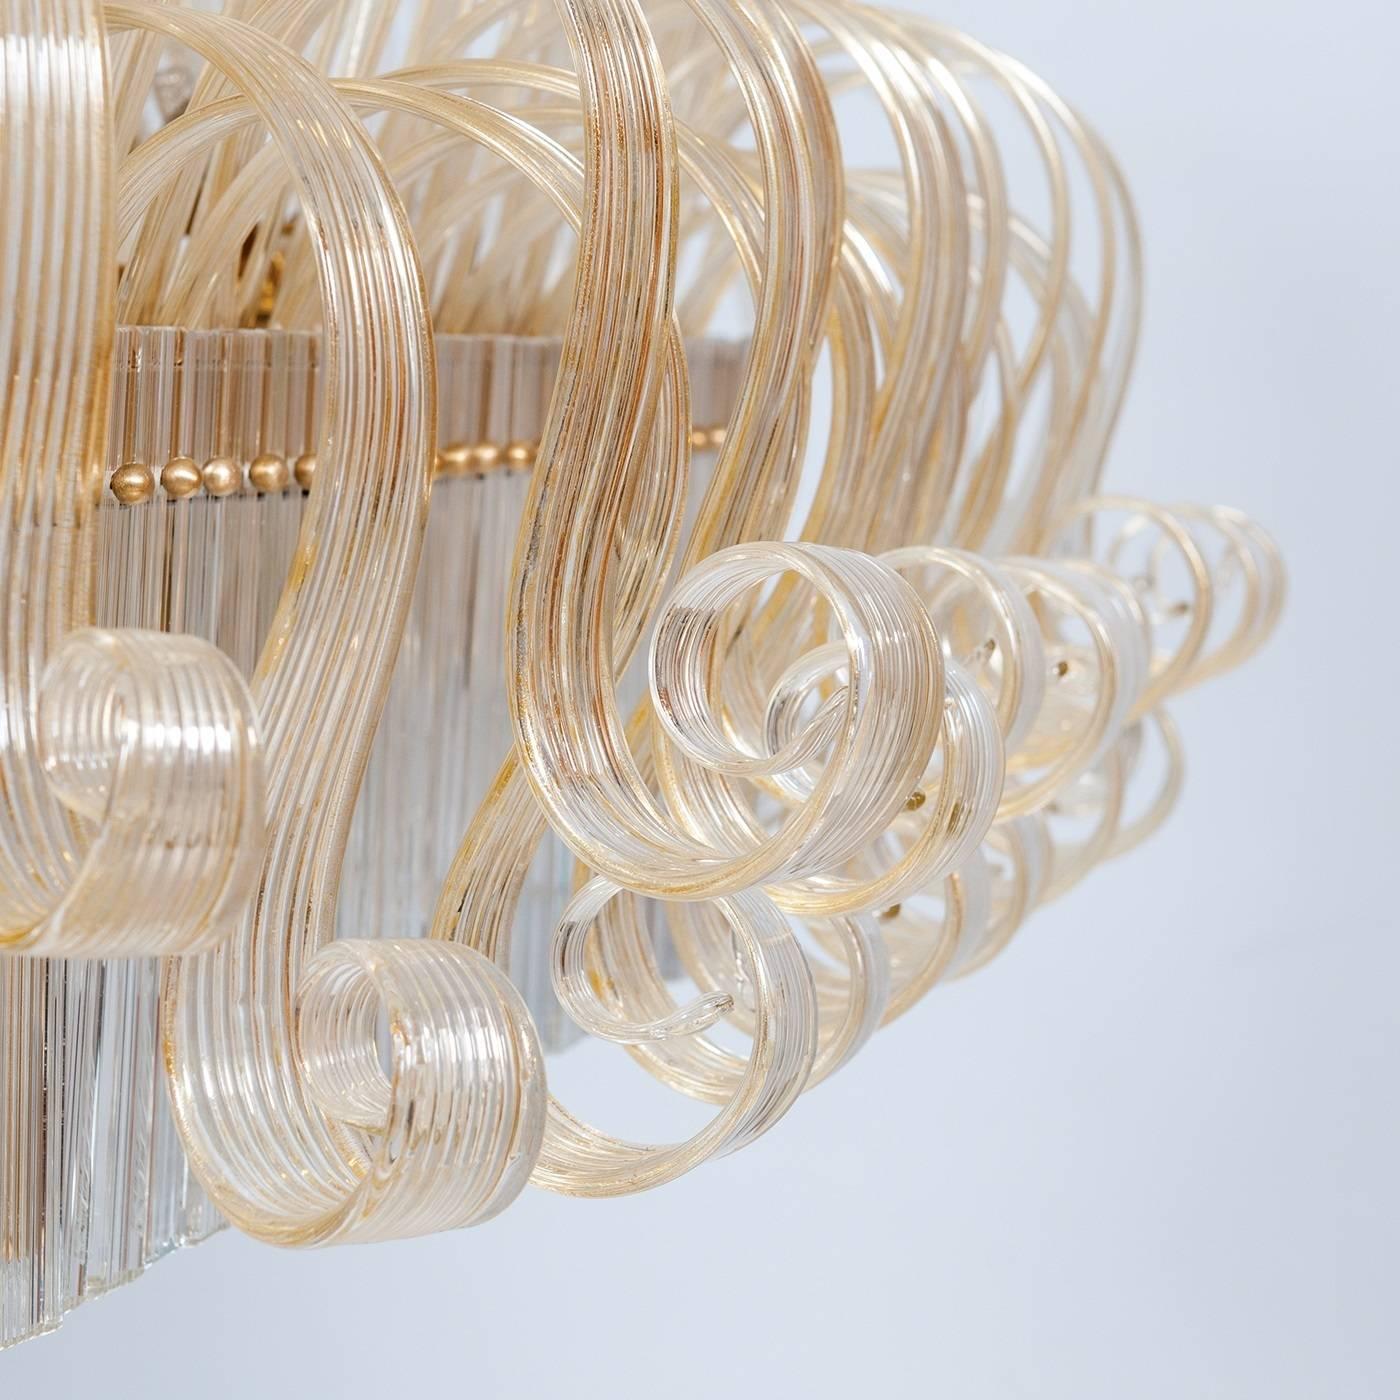 Limited Edition Italian Chandelier with 24-Karat Gold 1